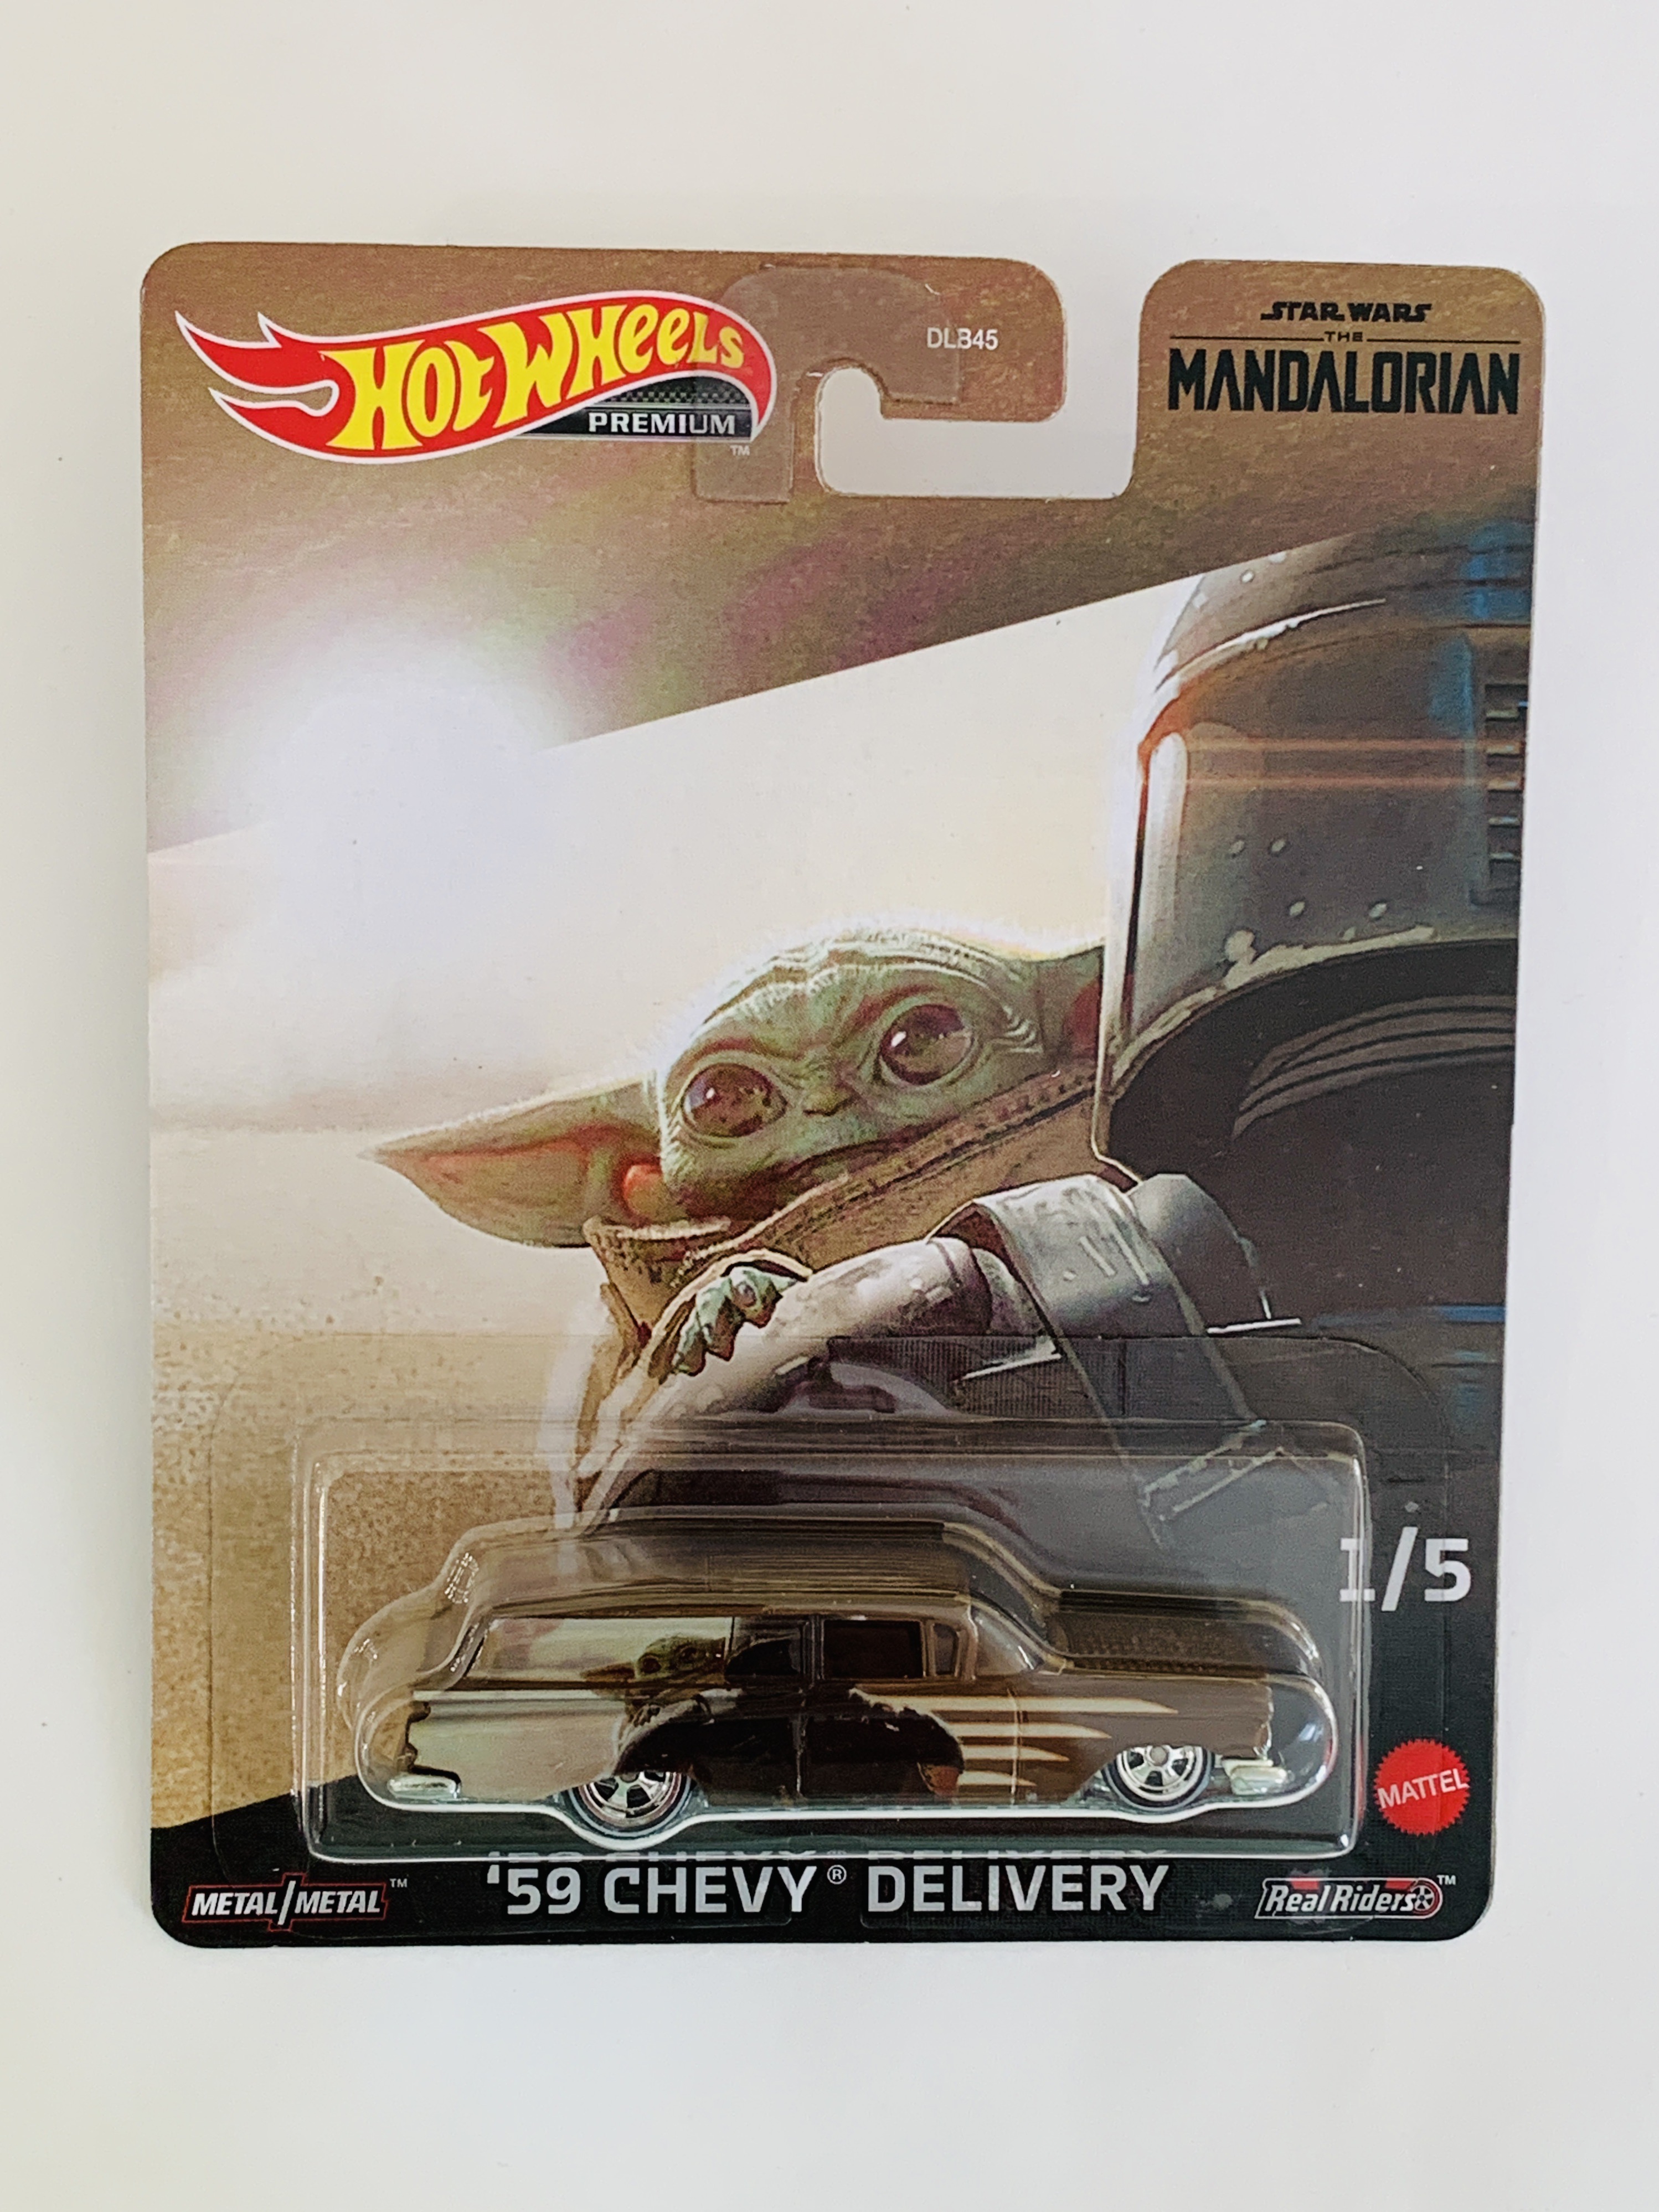 Hot Wheels Premium Star Wars The Mandalorian '59 Chevy Delivery